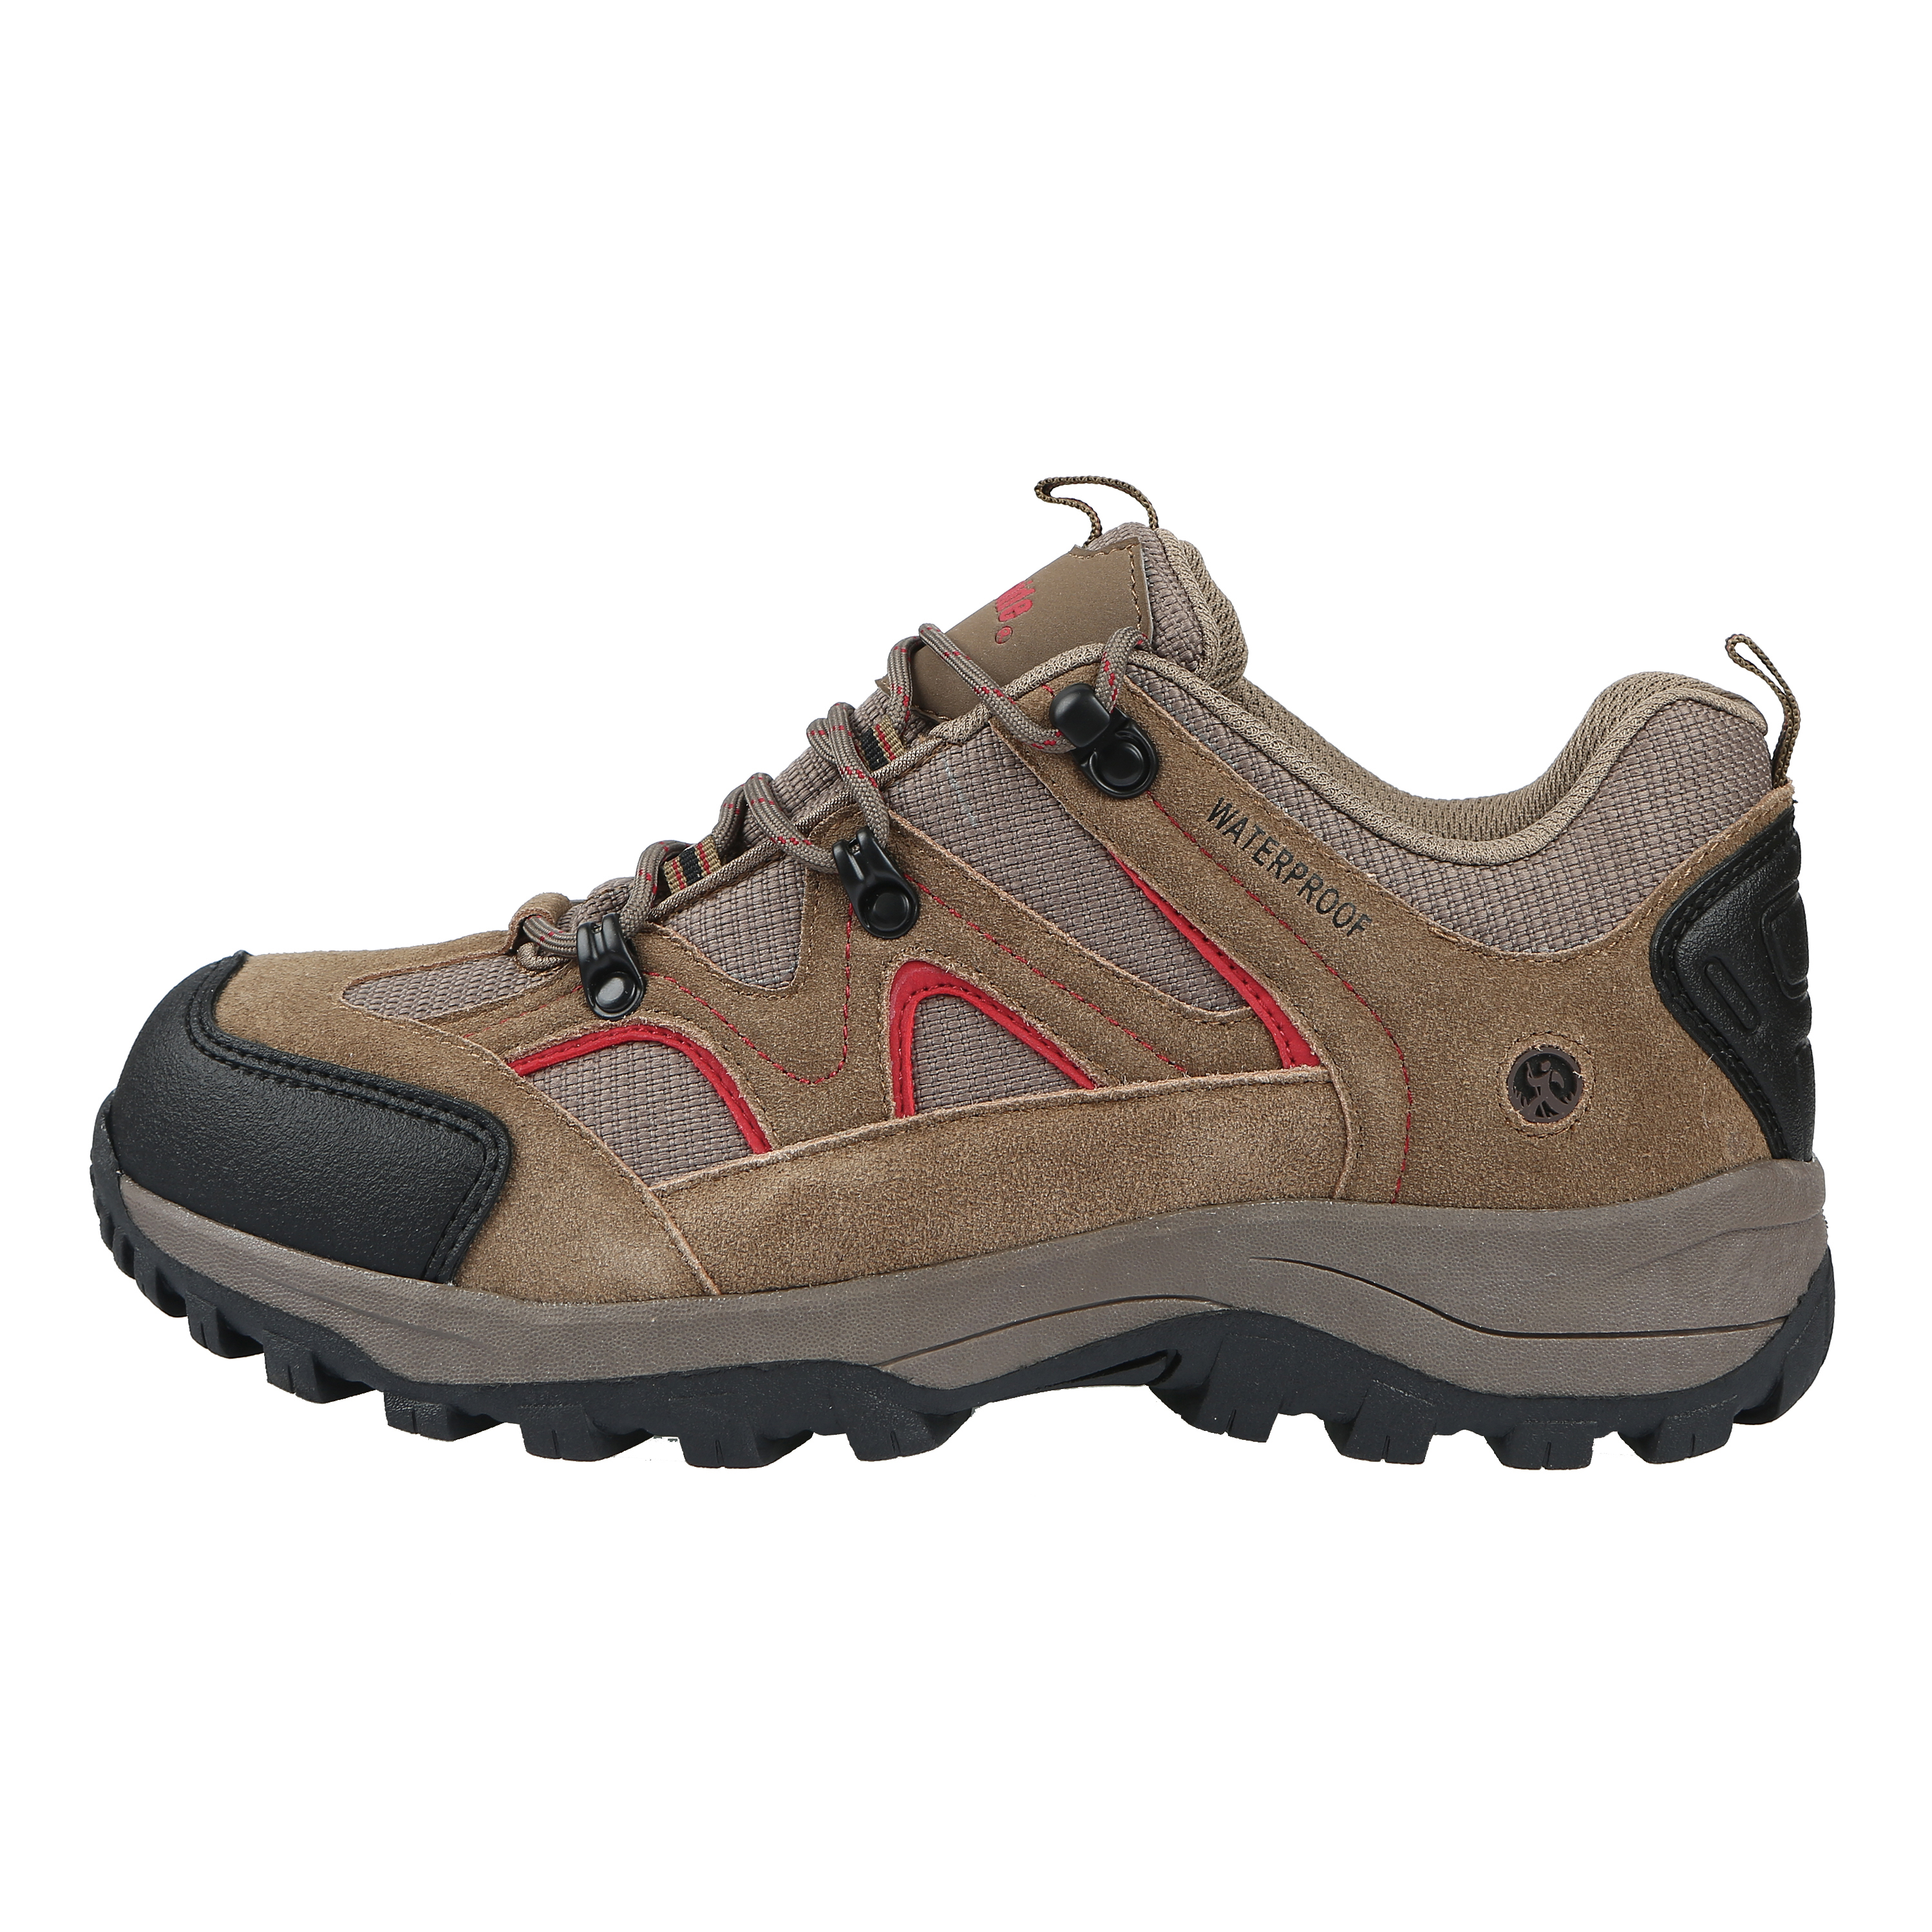 Northside Men's Snohomish Leather Water Resistant Hiking Shoe (Wide Available) - image 5 of 5